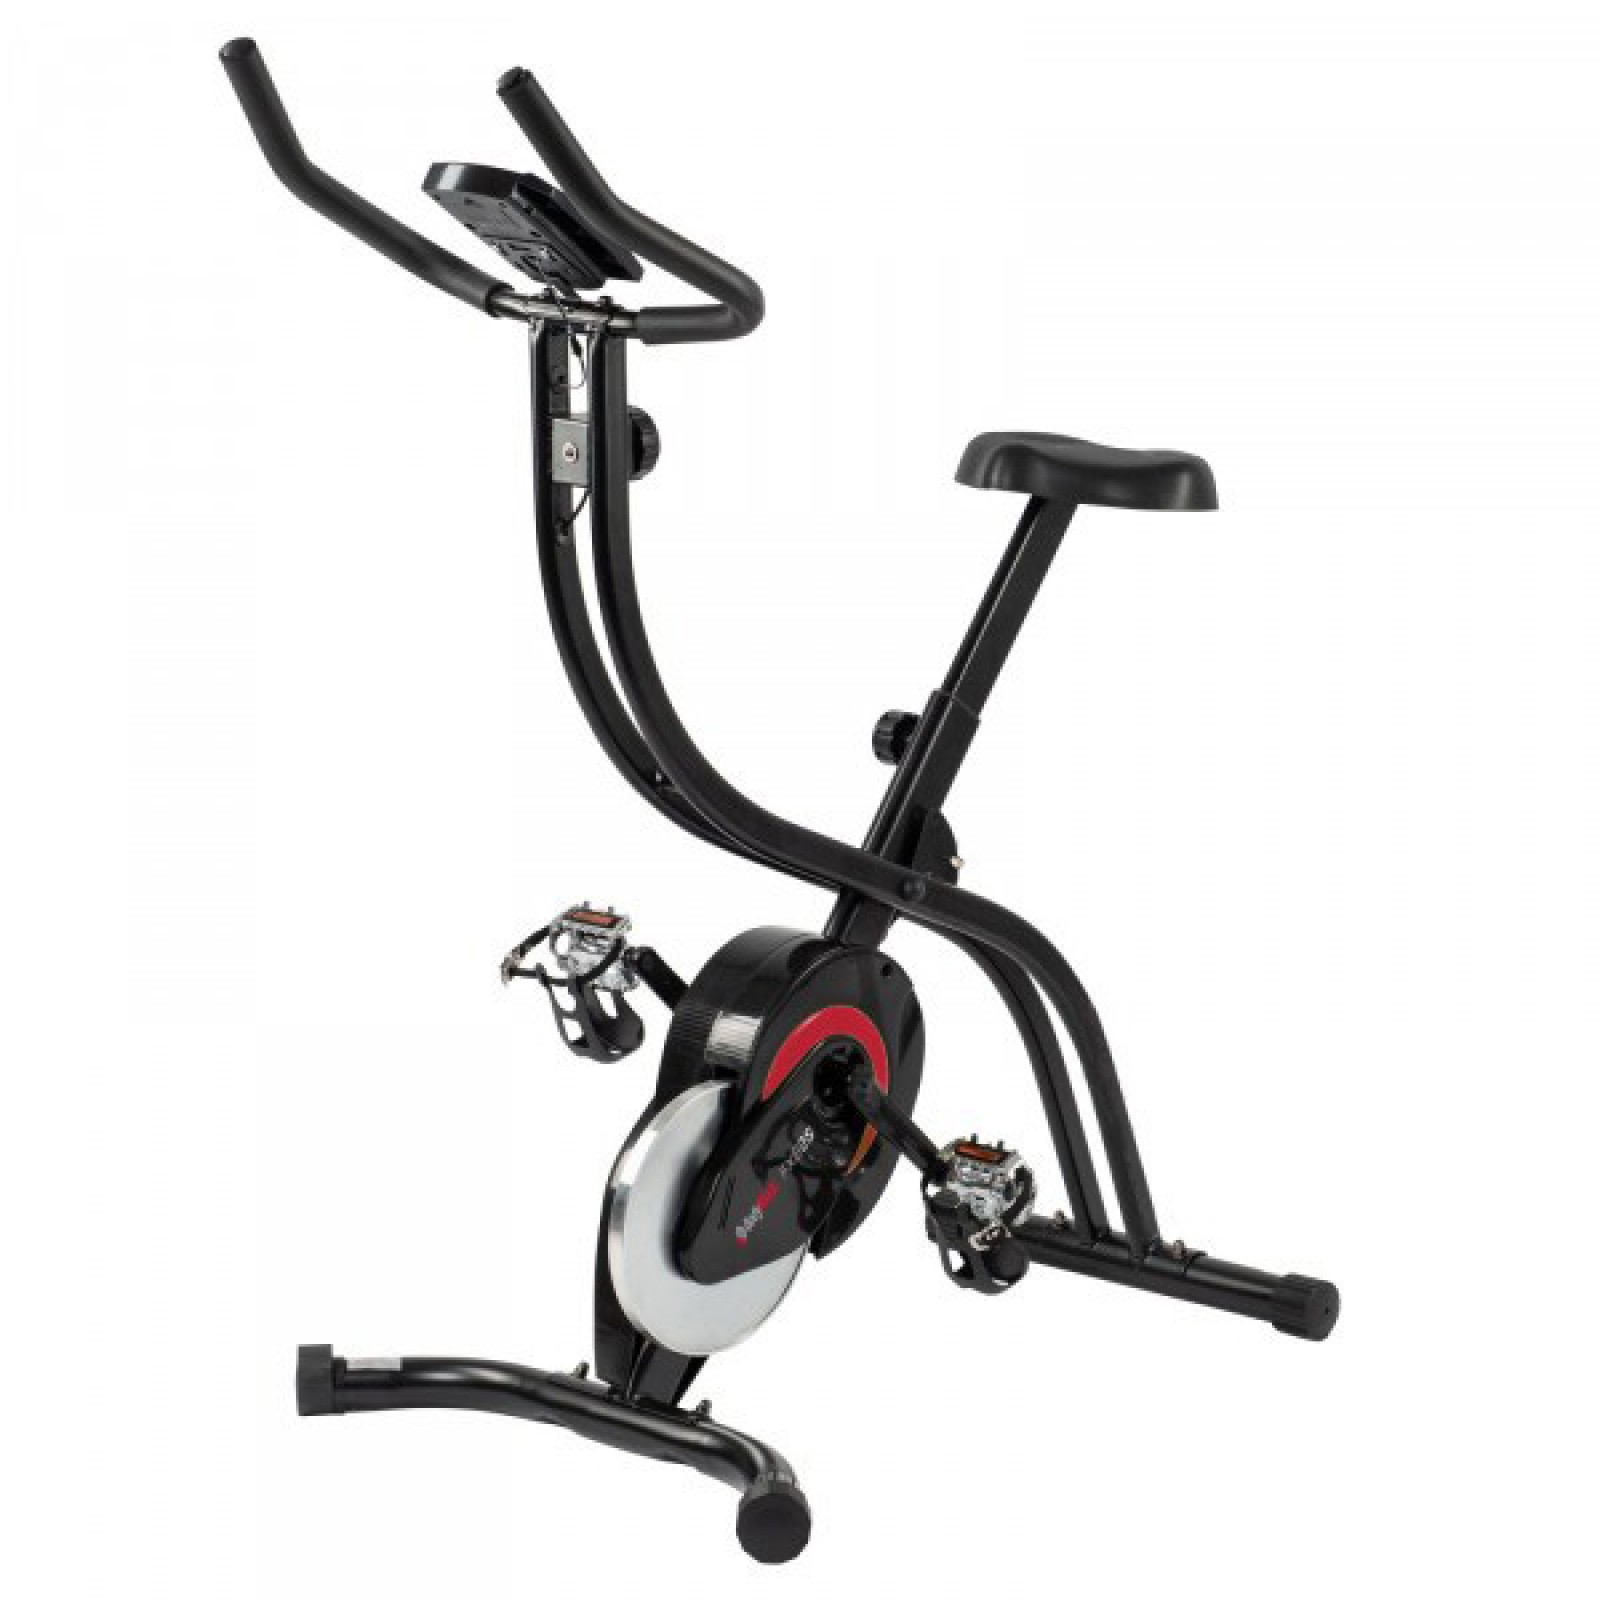 Fisher-Price Smart Cycle Trainer In-Depth Review